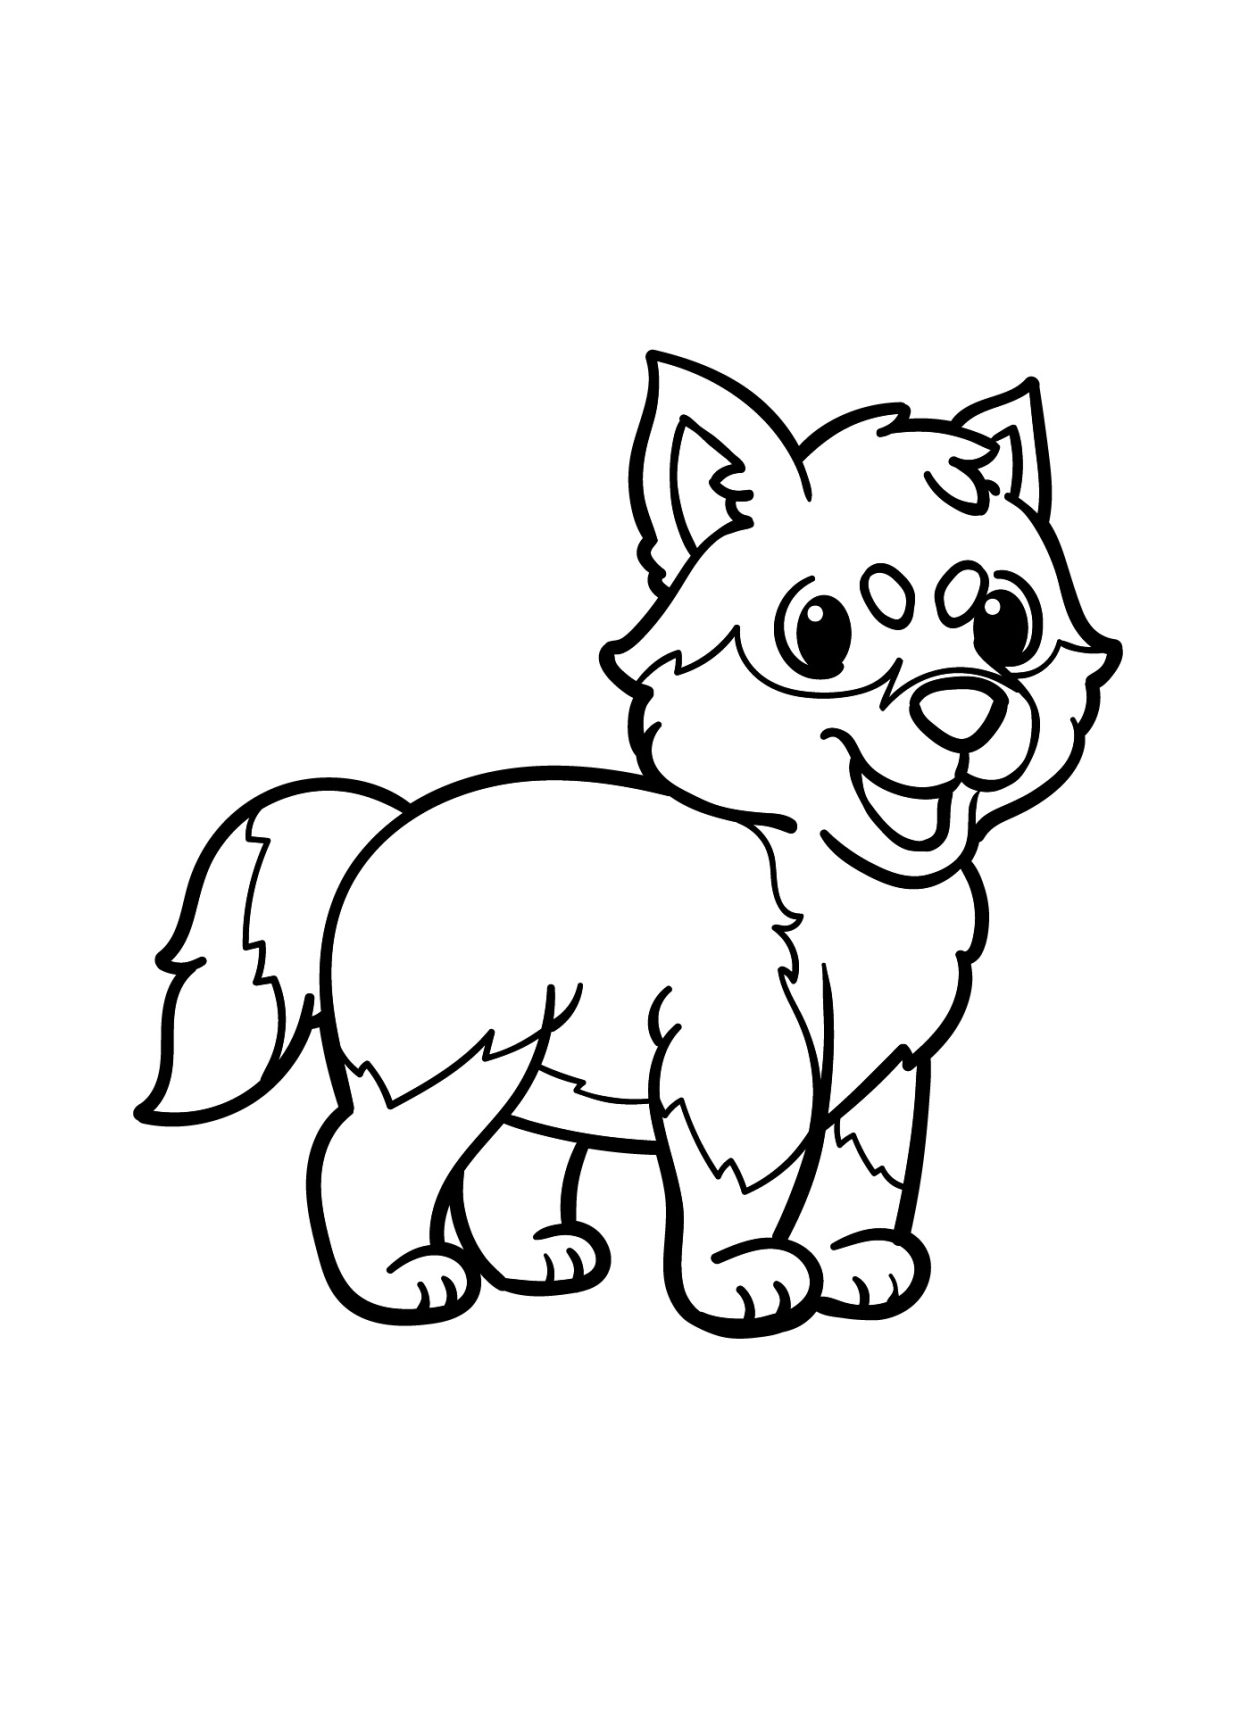 Oppdag Husky Puppy Coloring Pages - Perfekt for hundeelskere